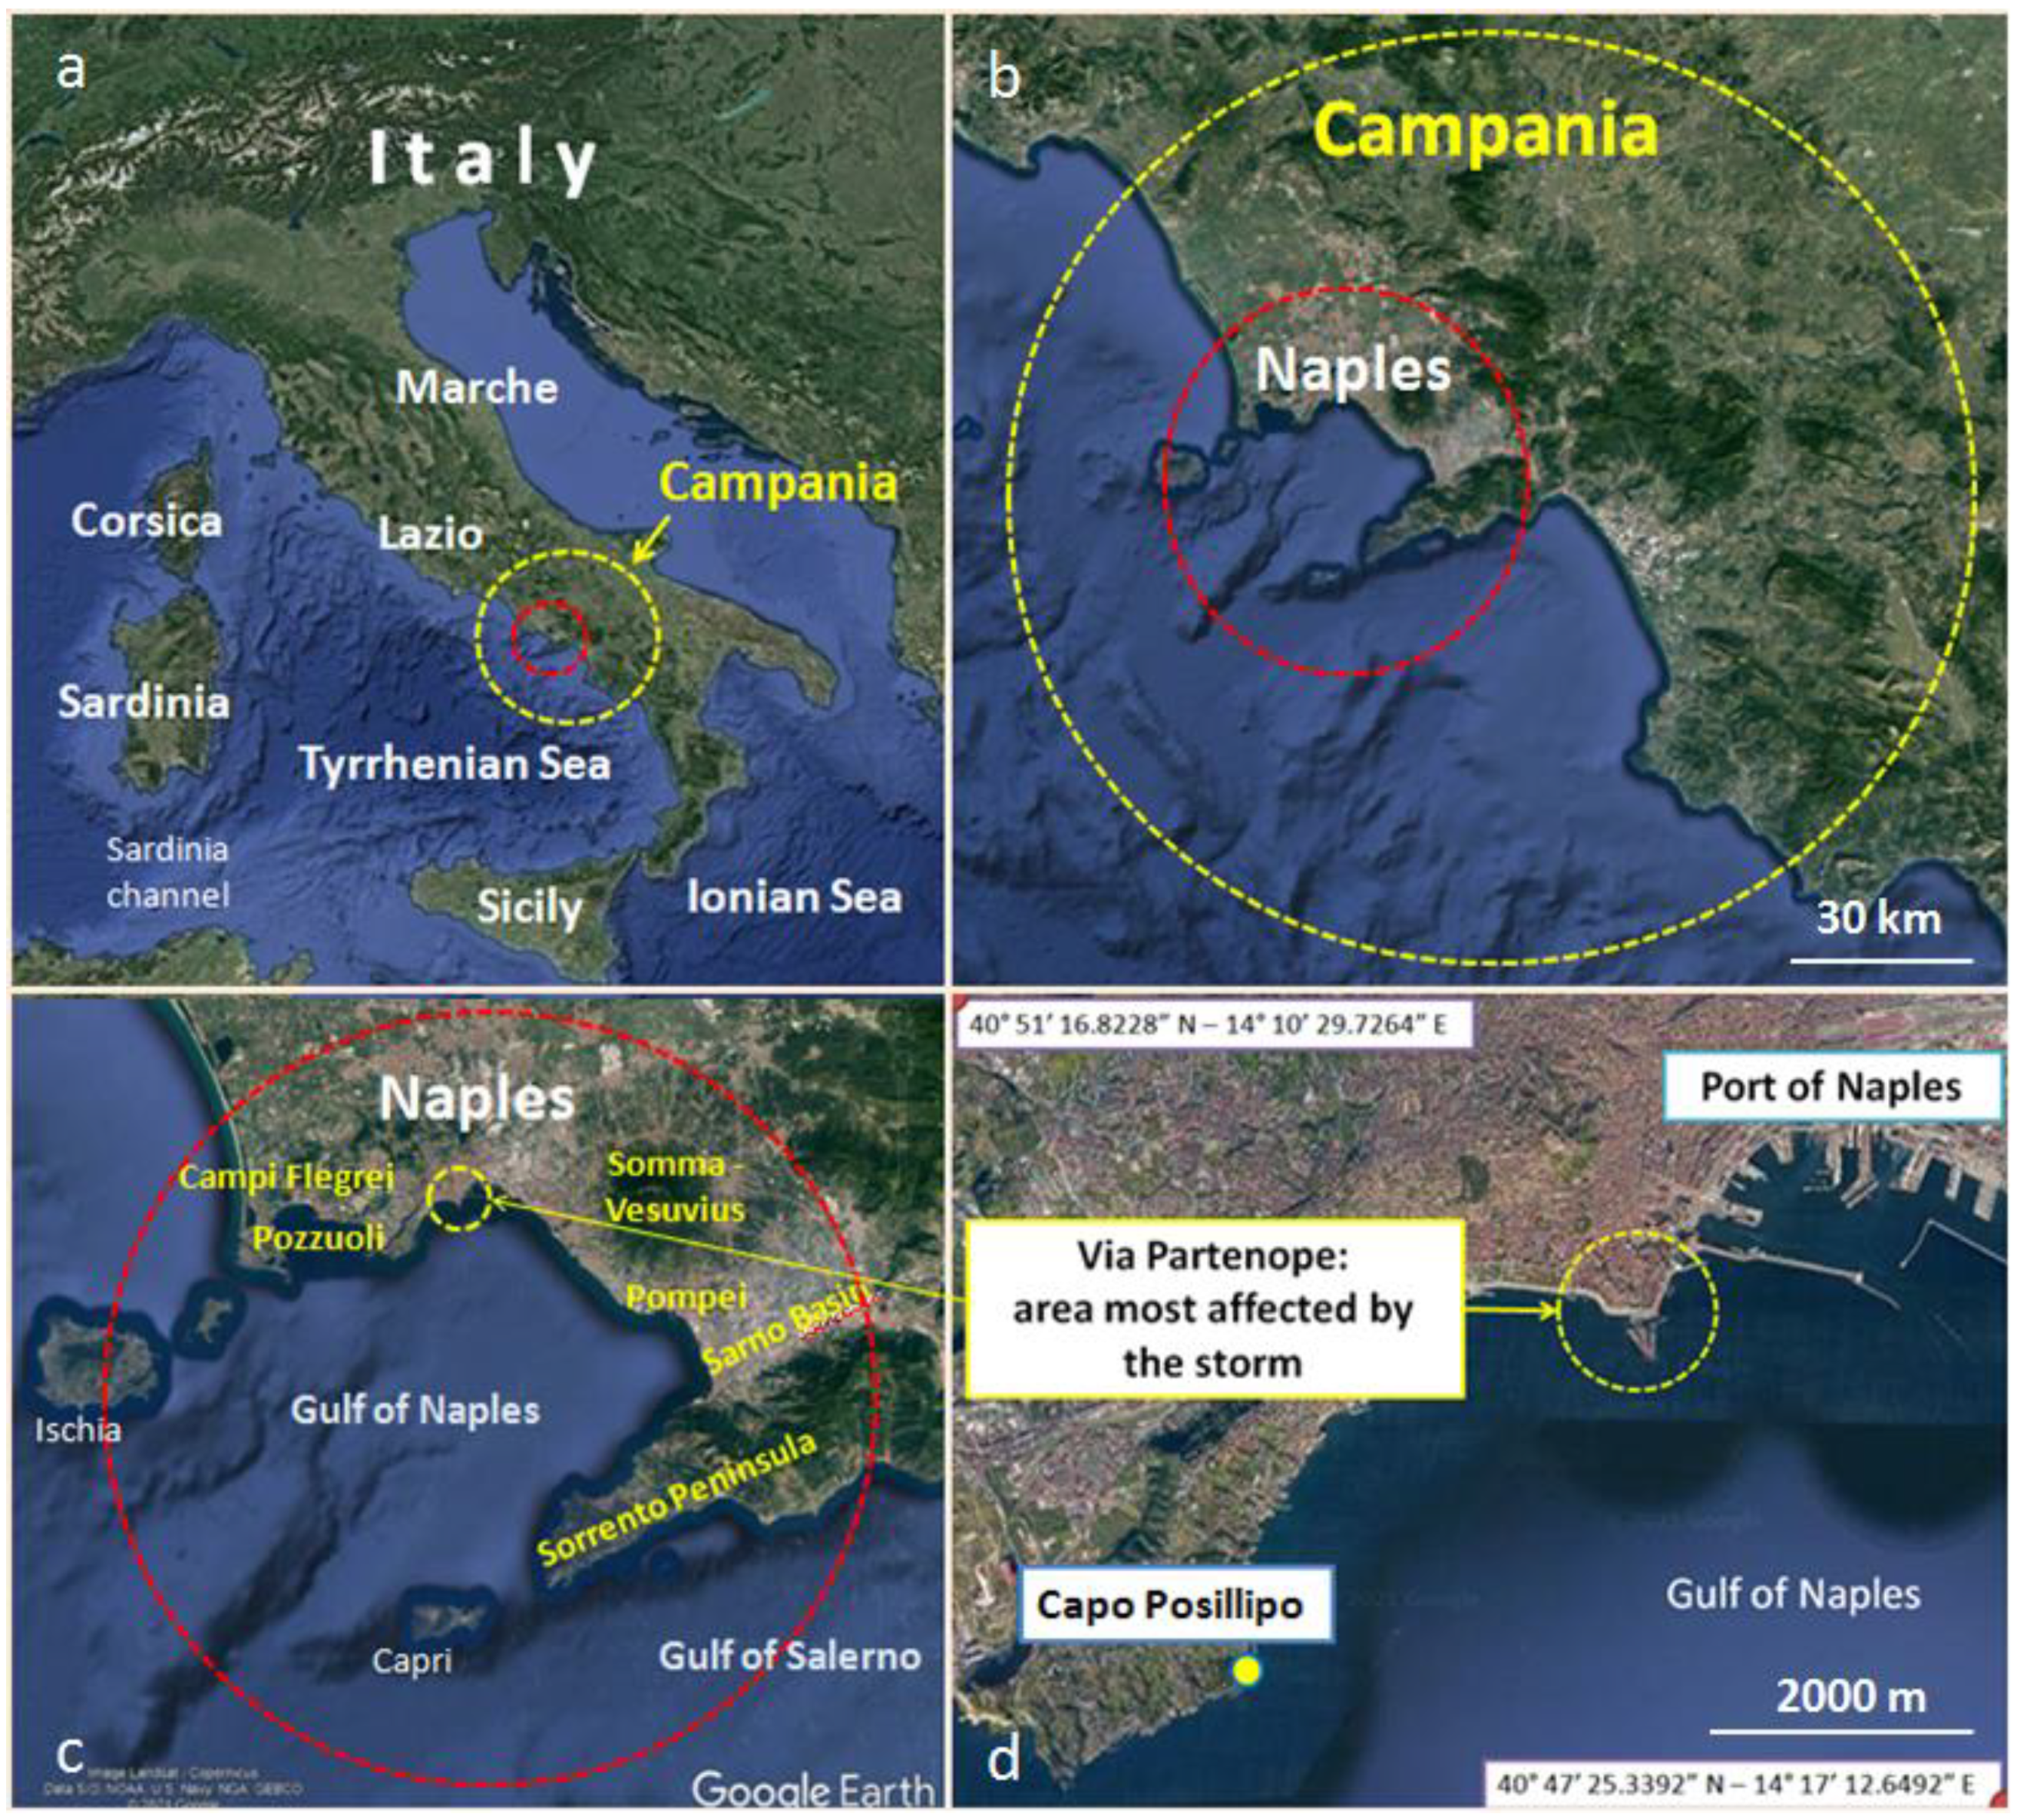 Applied Sciences | Free Full-Text | Analysis of Sea Storm Events in the  Mediterranean Sea: The Case Study of 28 December 2020 Sea Storm in the Gulf  of Naples, Italy